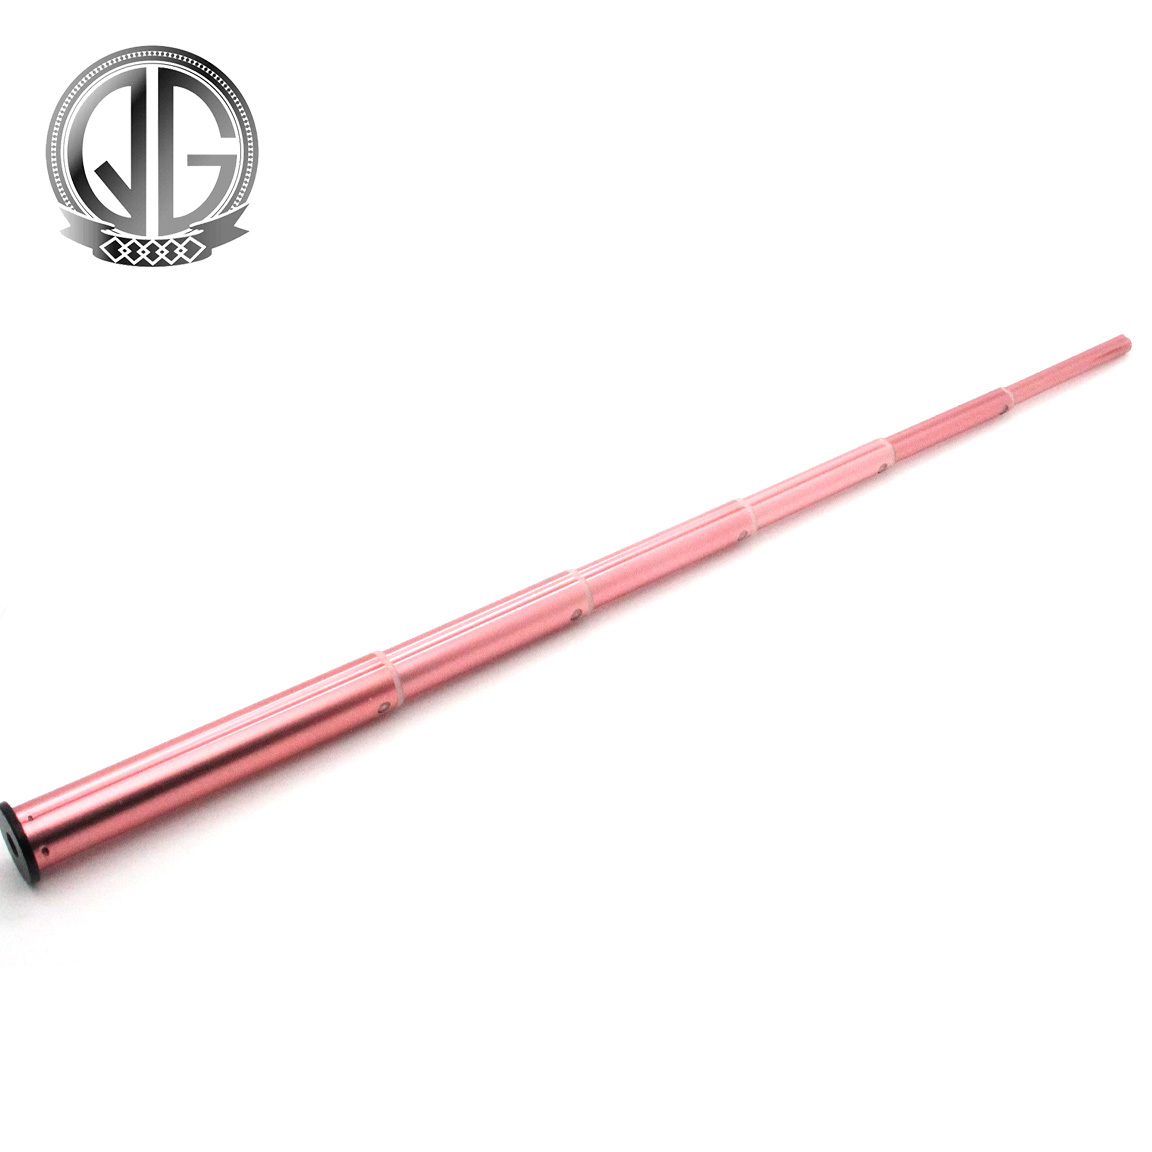 Customized Telescopic Metal Stainless Steel Telescopic Medium Size Blower Blowpipe Featured Image